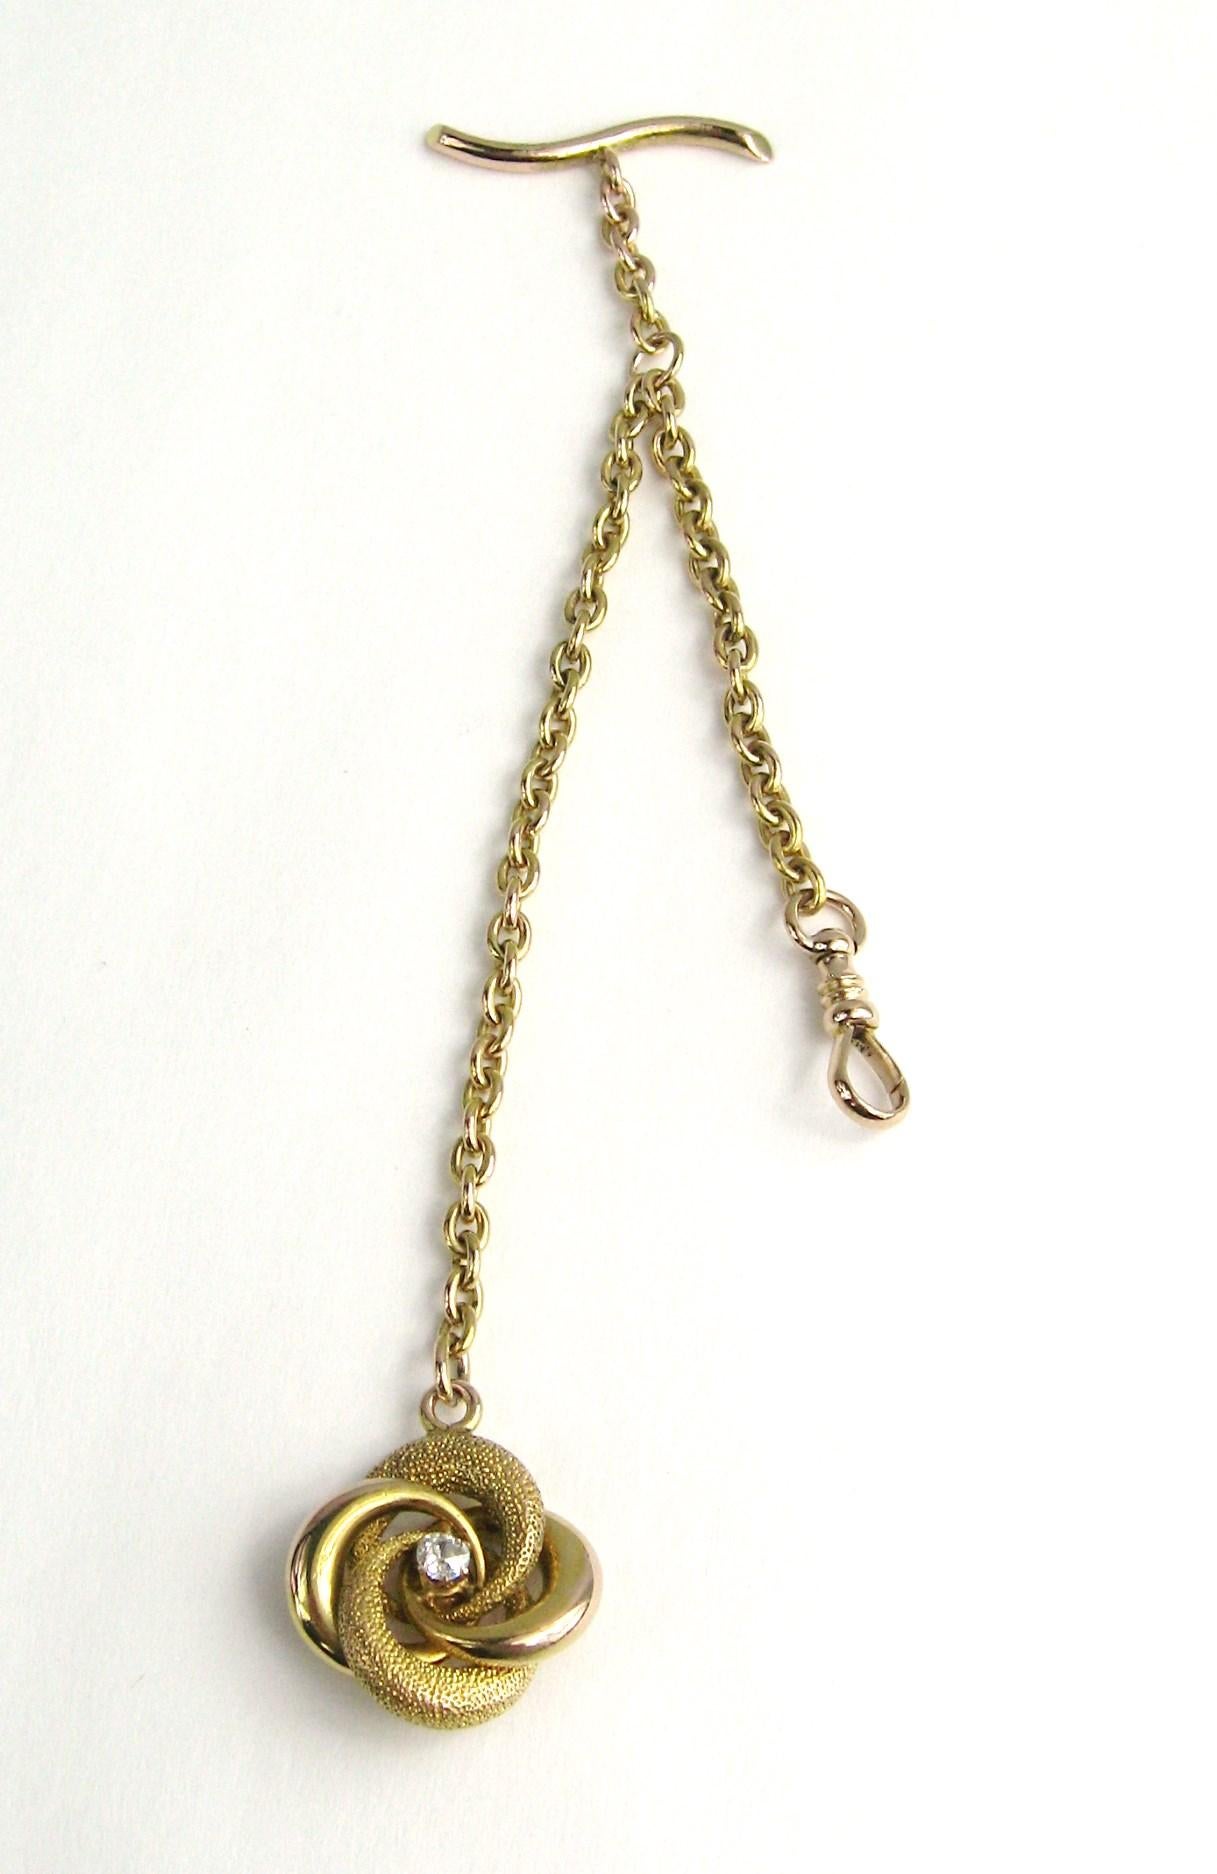 14K Gold Victorian Watch Chain. Chain Measuring 6 in. long with a Gold Knot that has a center rose cut diamond. The knot measuring .80